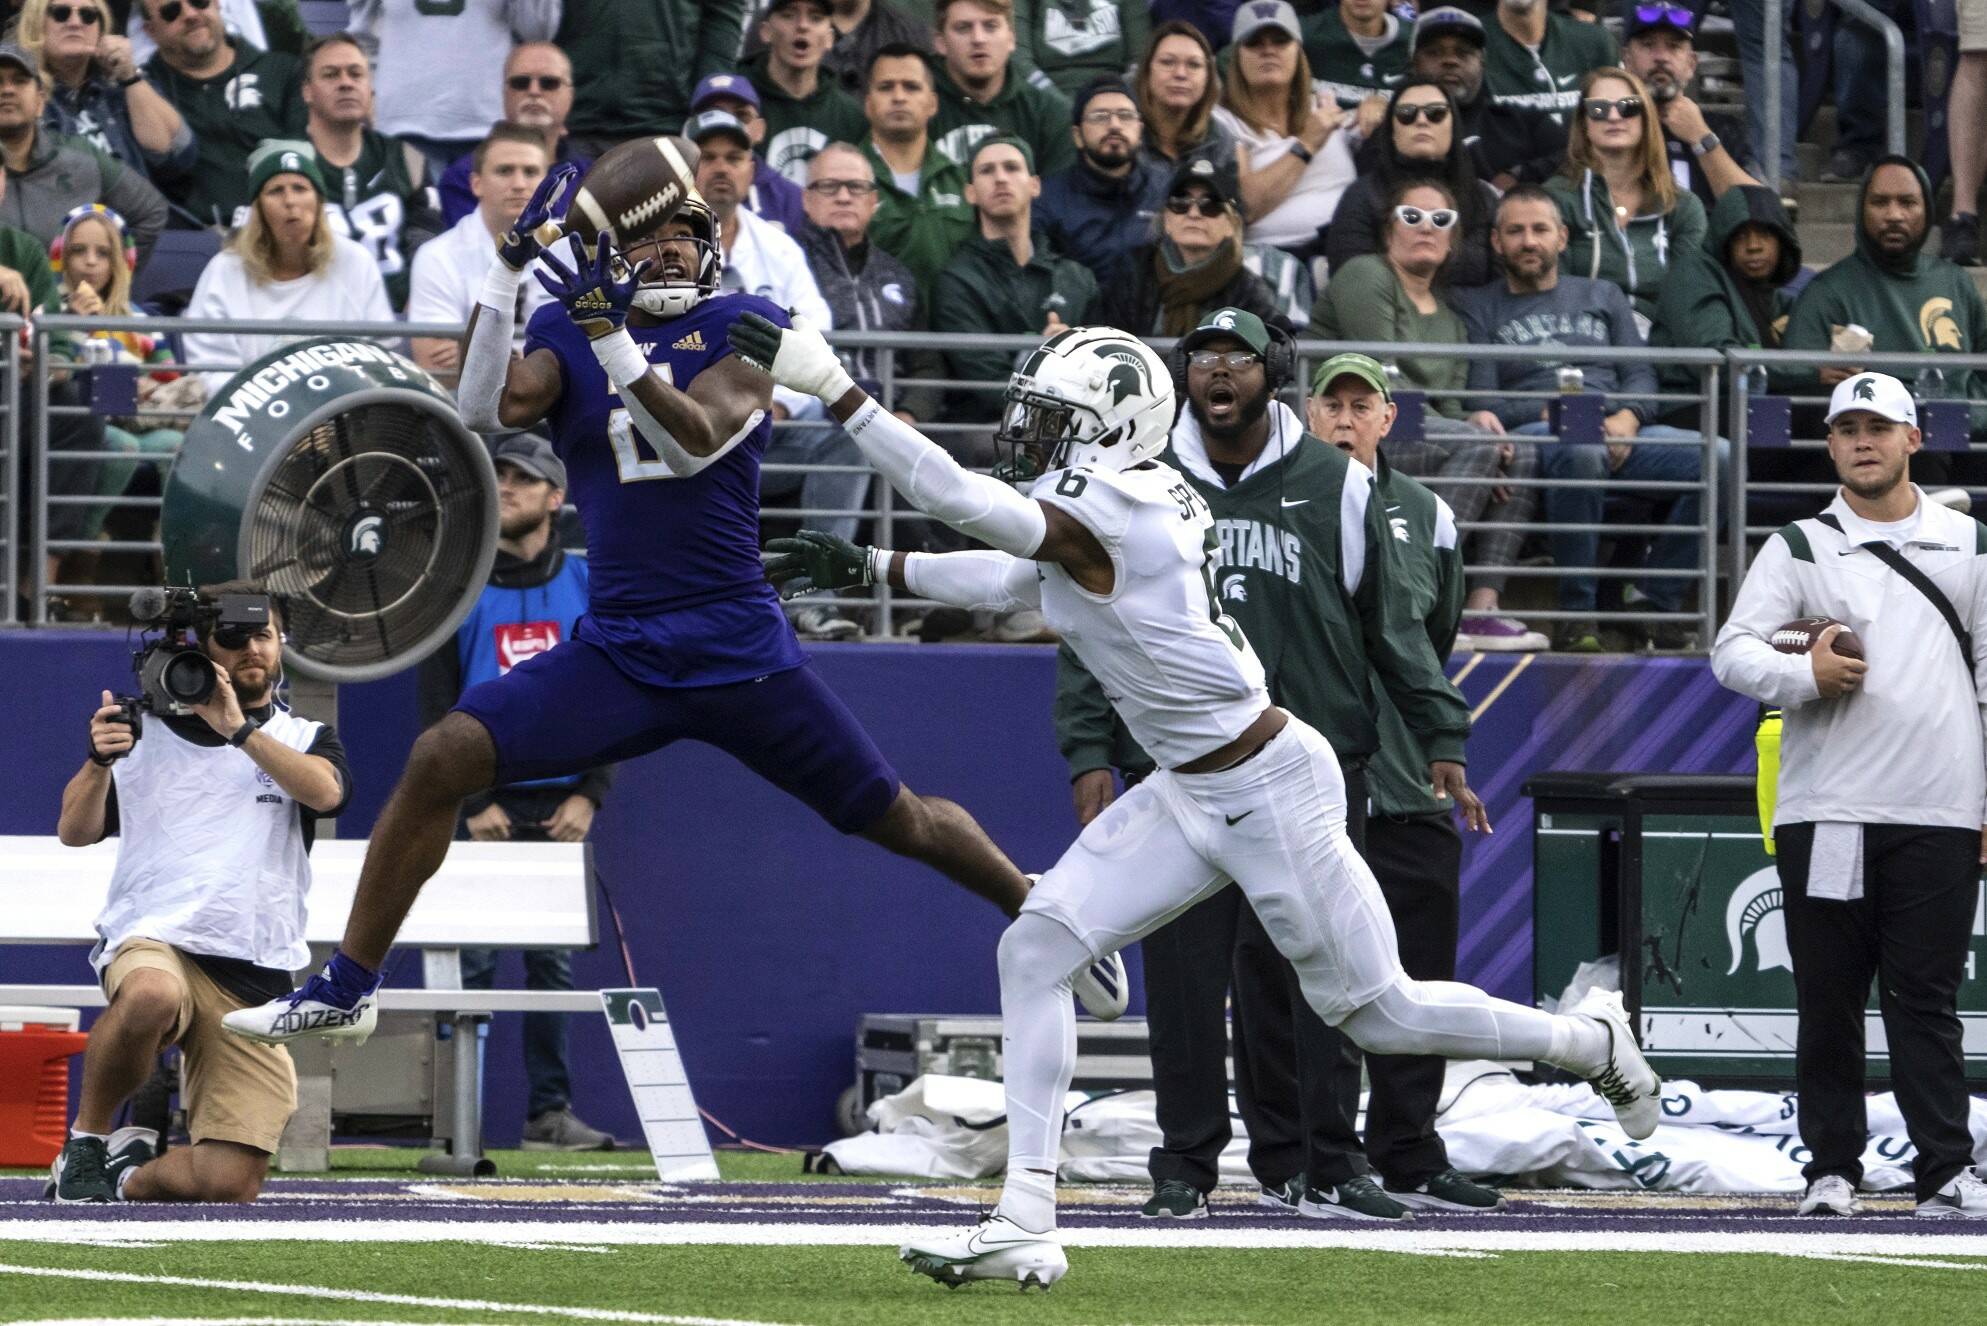 Washington wide receiever Ja'Lynn Polk, left, makes a reception against Michigan State defensive back Ameer Speed during the first half of an NCAA college football game, Saturday, Sept. 17, 2022, in Seattle. (AP Photo/Stephen Brashear)